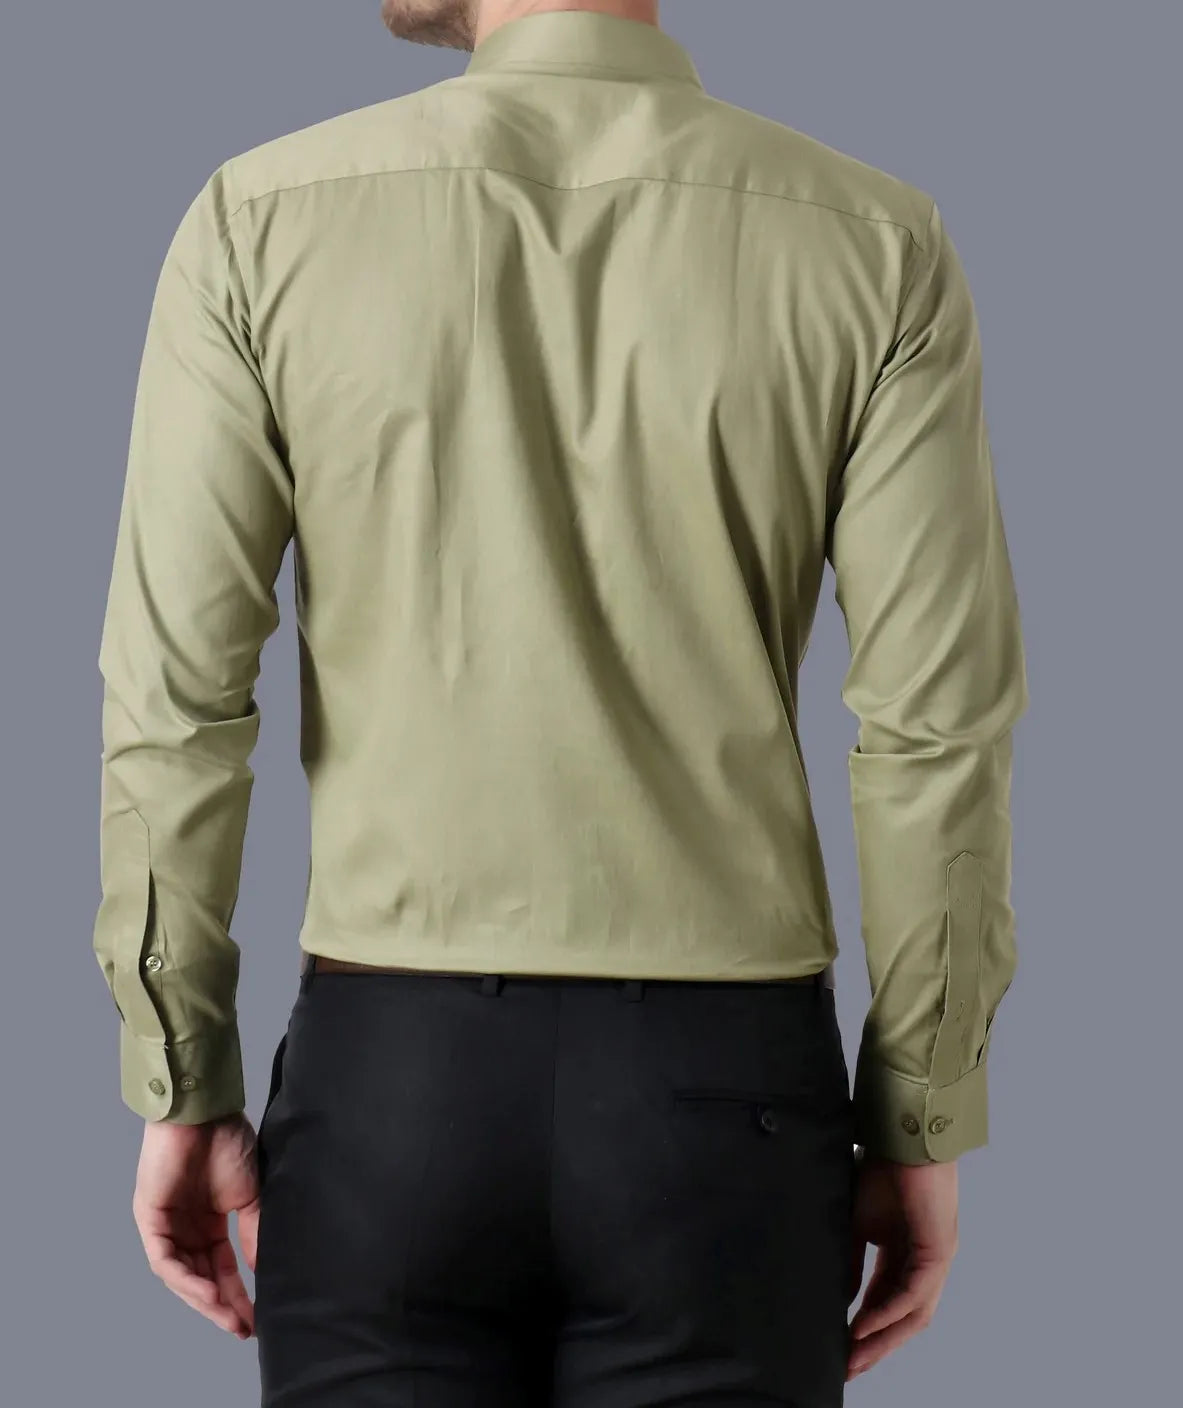 Men's Cotton Solid Shirts (Formal, Olive Green)